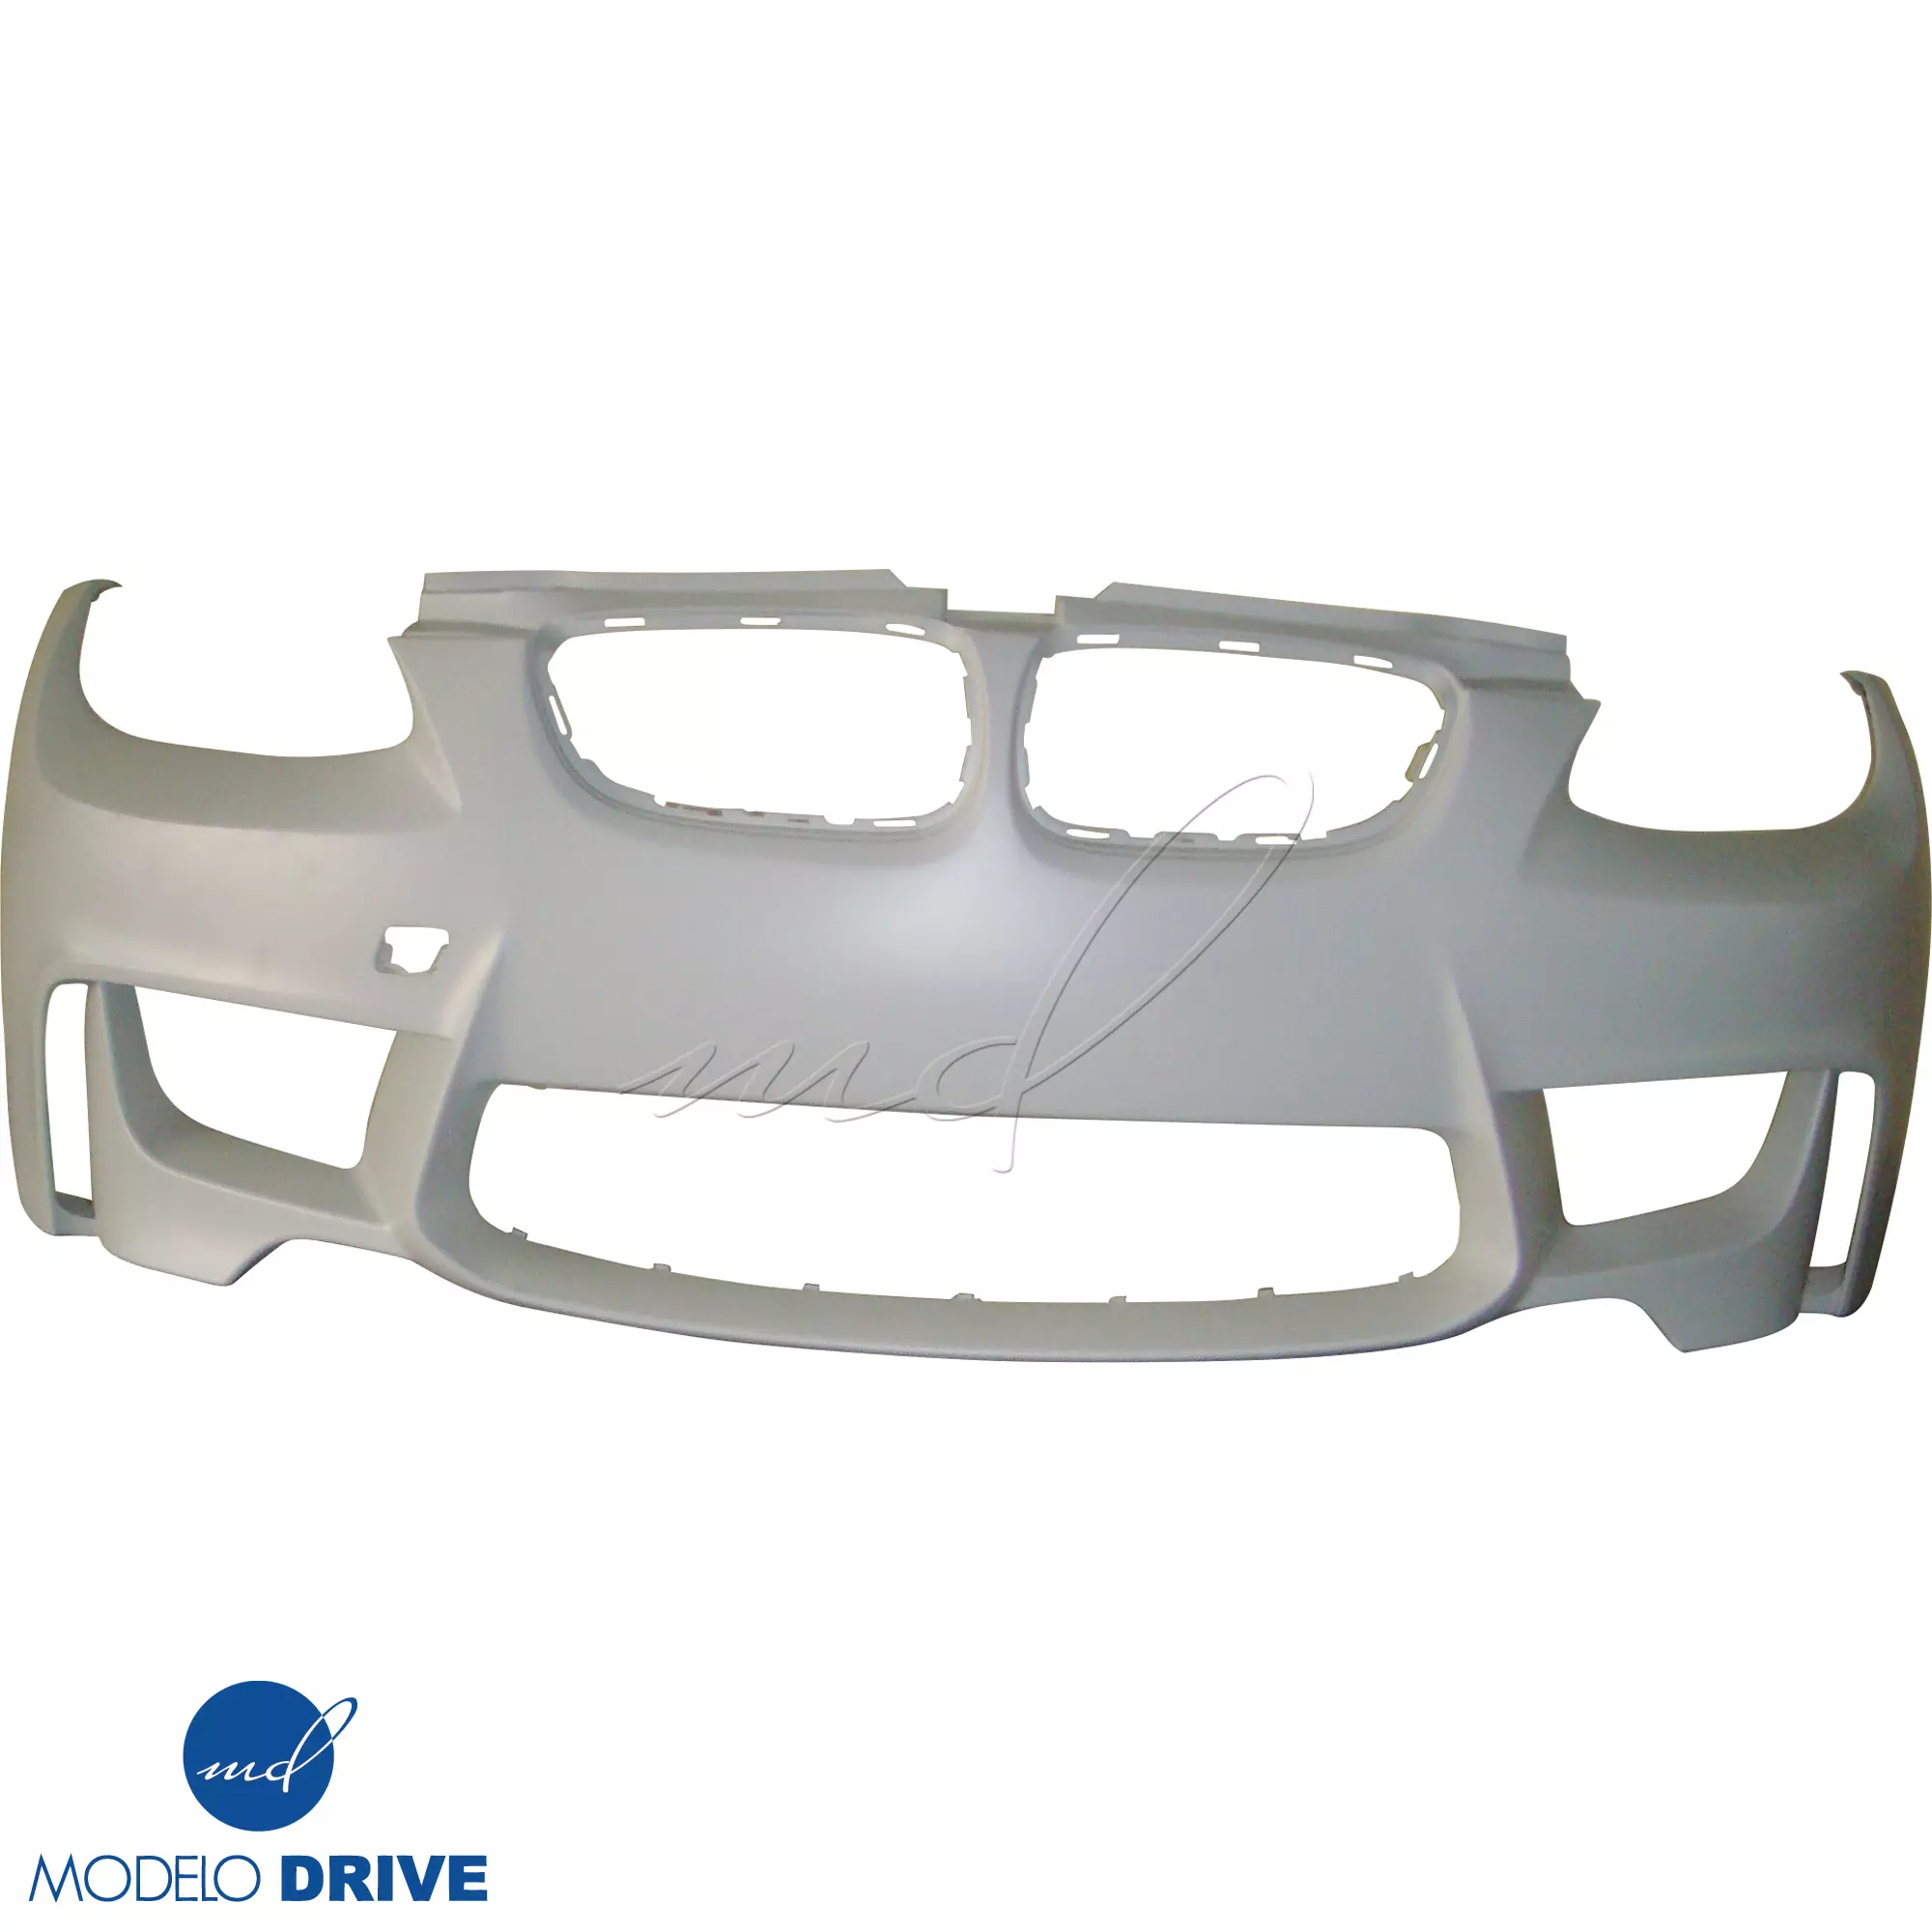 ModeloDrive FRP 1M-Style Front Bumper > BMW 3-Series E92 2007-2010 > 2dr - Image 14